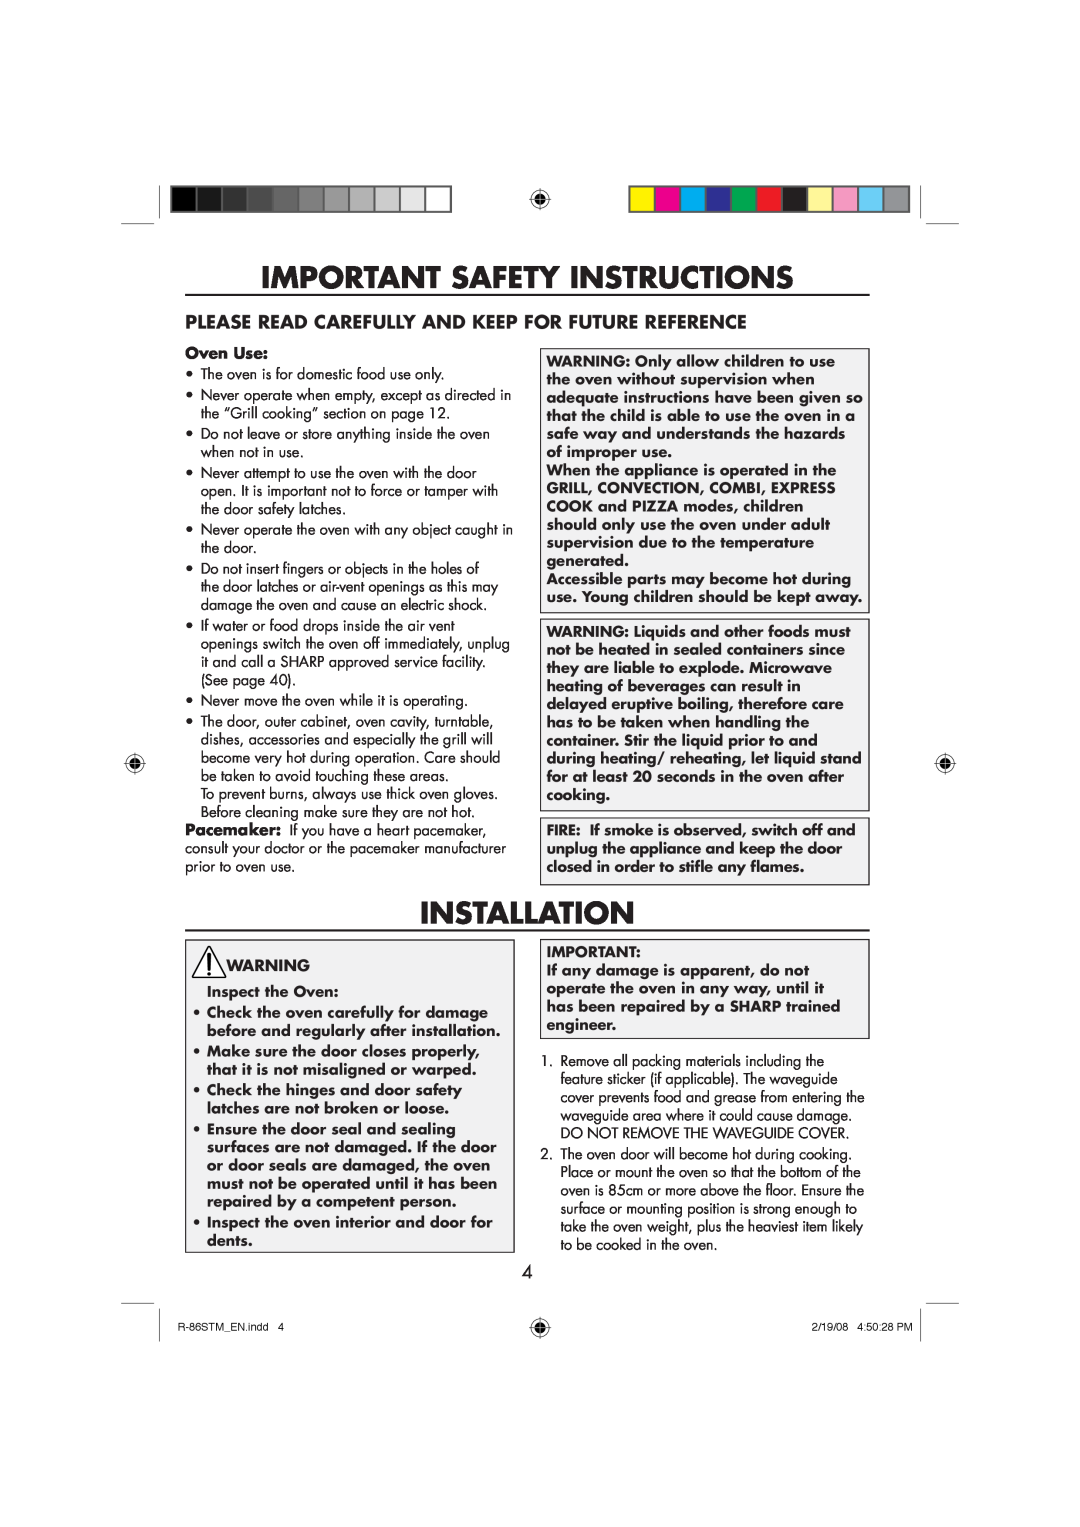 Sharp R-86STM Important Safety Instructions, Installation, Please Read Carefully And Keep For Future Reference, Oven Use 